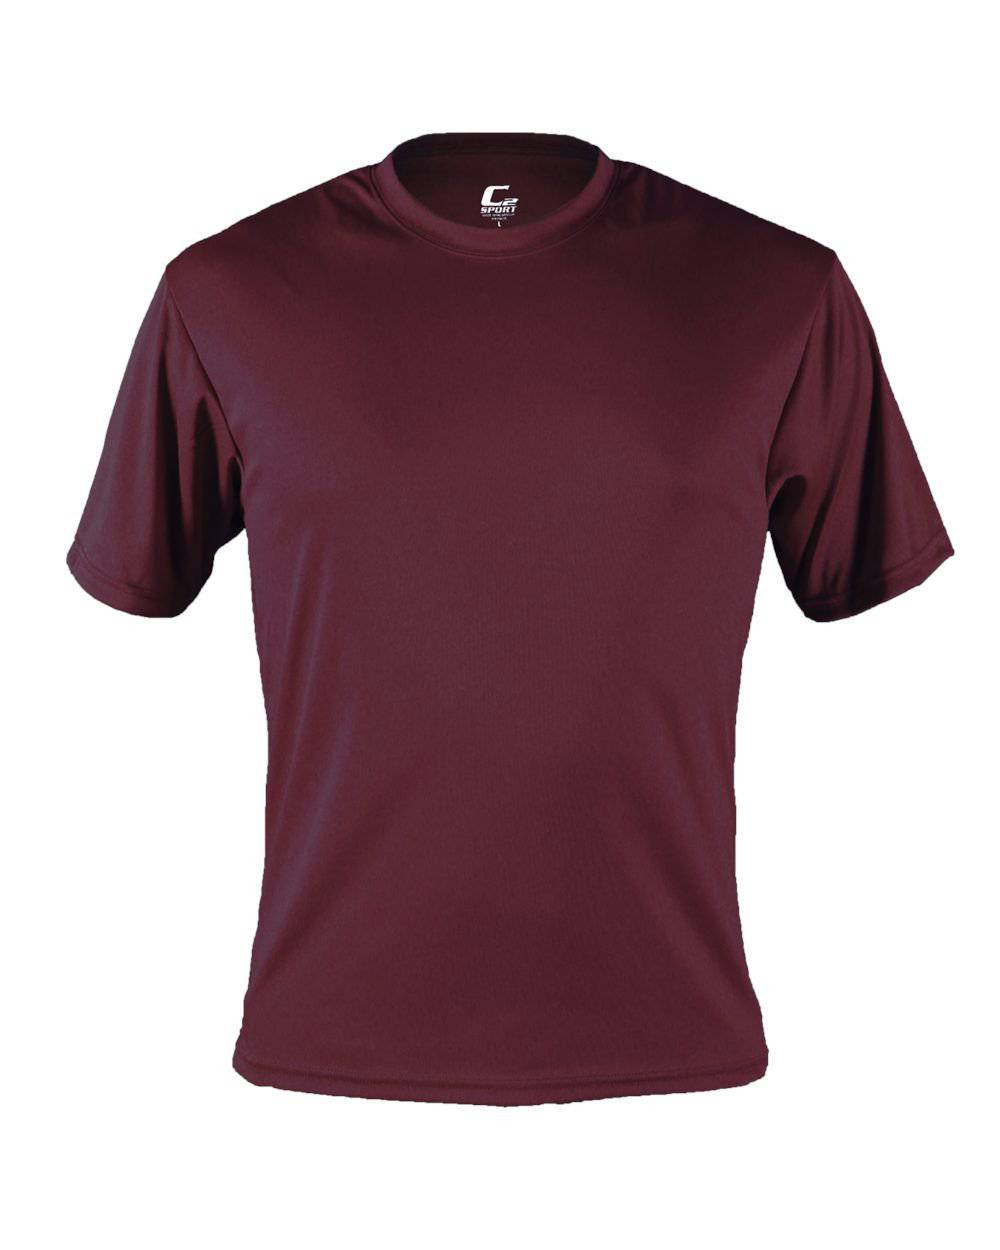 C2 Sport 5200 Performance Youth Tee - Maroon - HIT a Double - 1